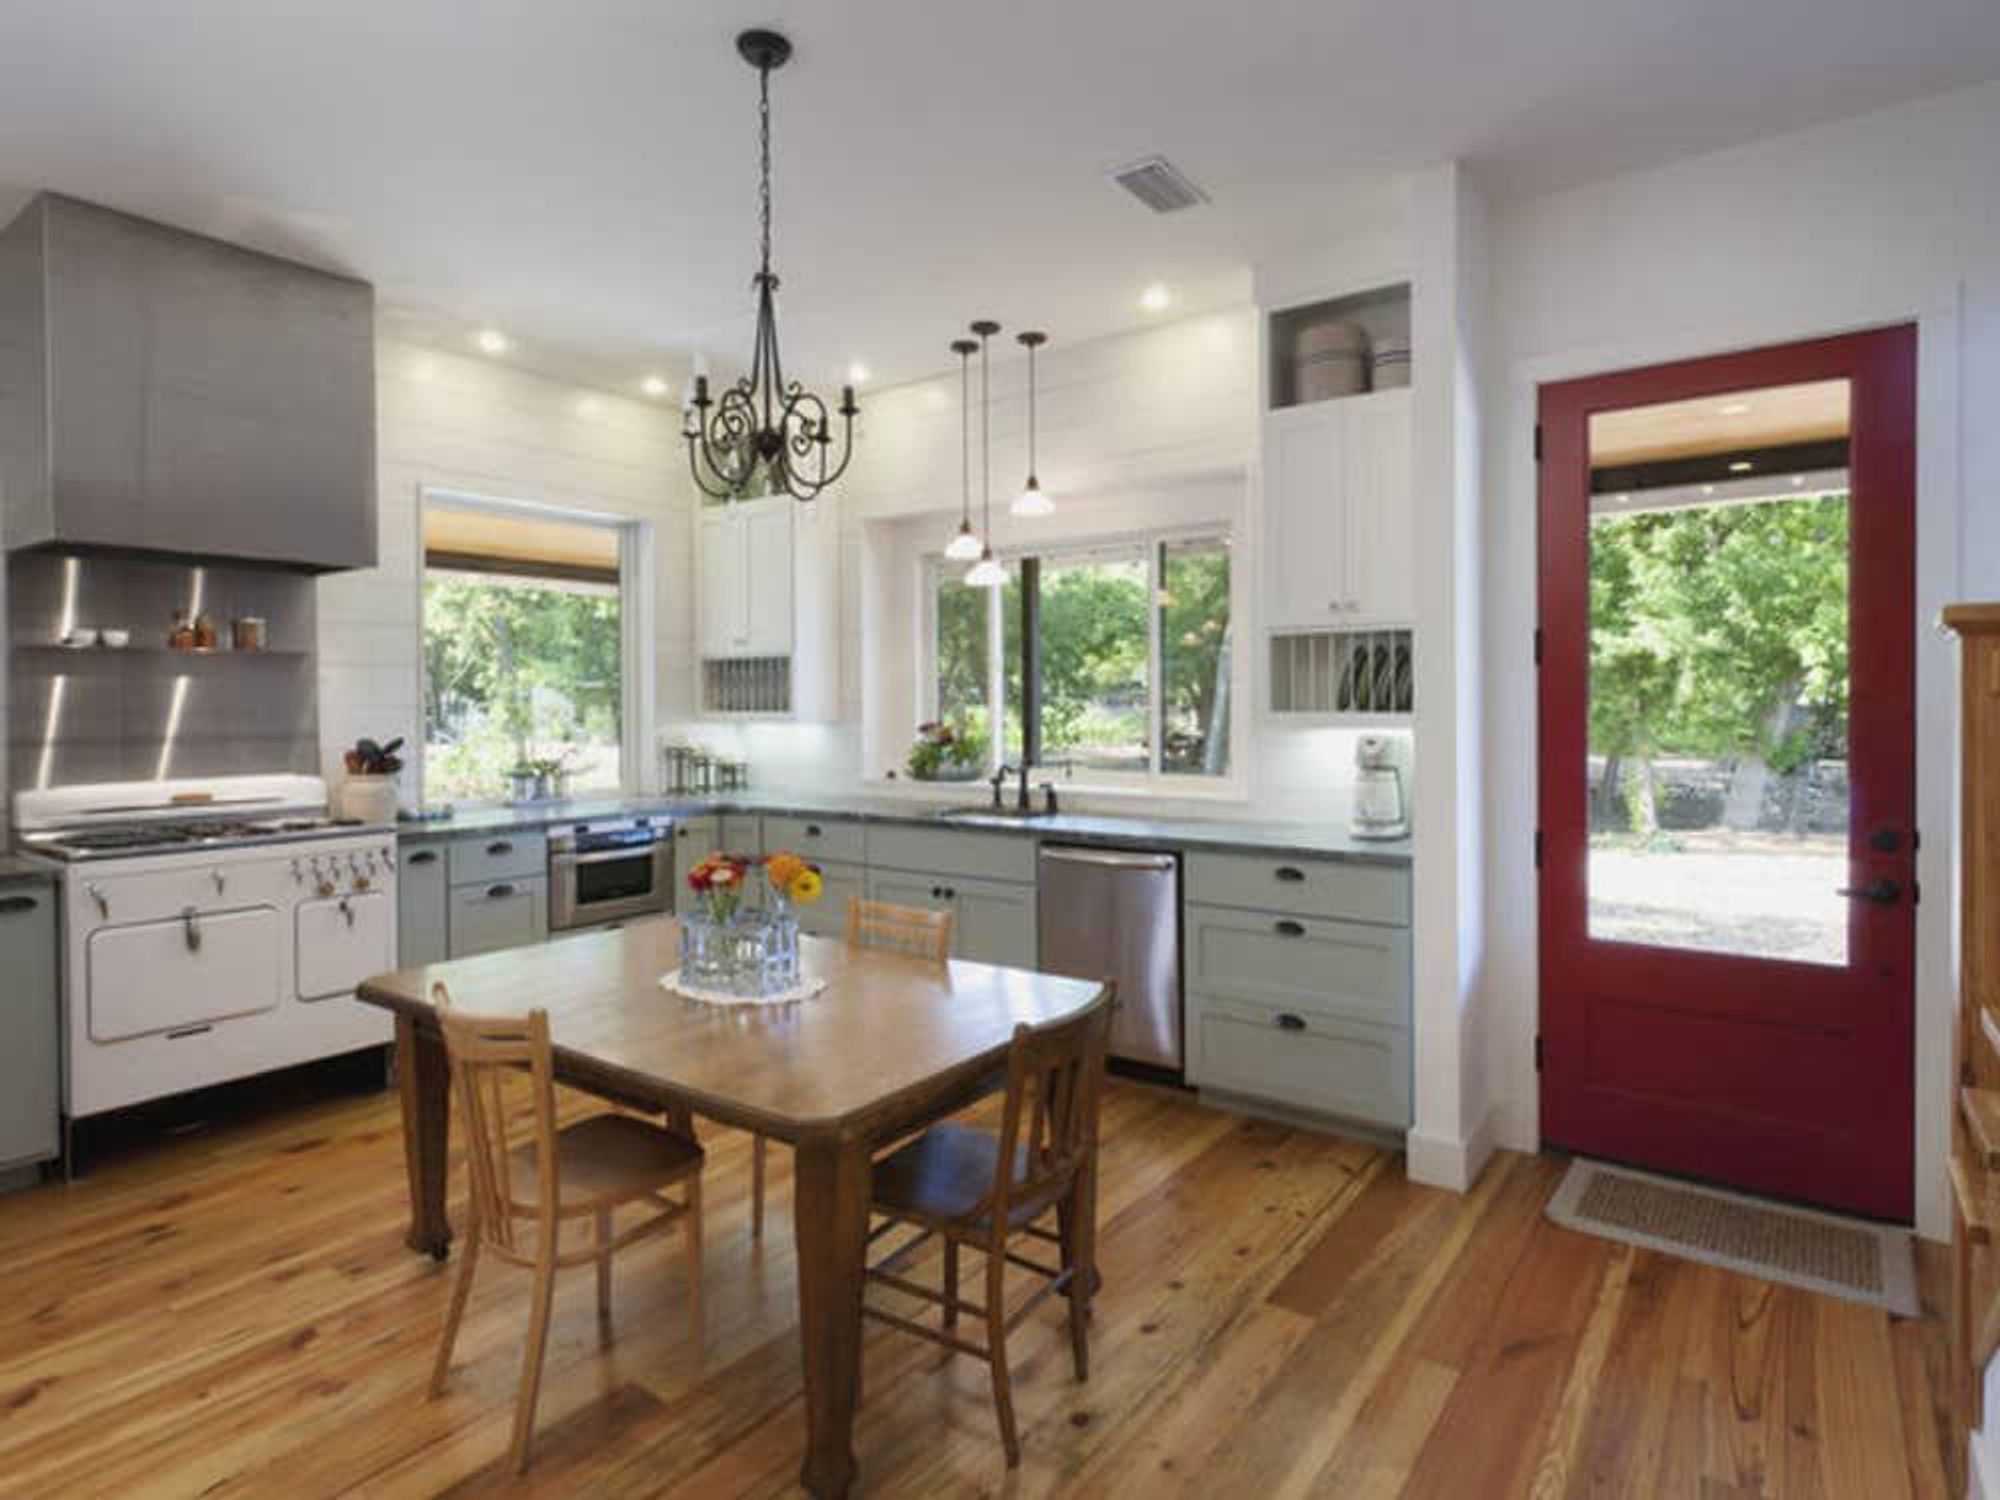 https://fortworth.culturemap.com/media-library/houzz-colorful-farmhouse-kitchen.jpg?id=30458790&width=2000&height=1500&quality=85&coordinates=0%2C0%2C0%2C0